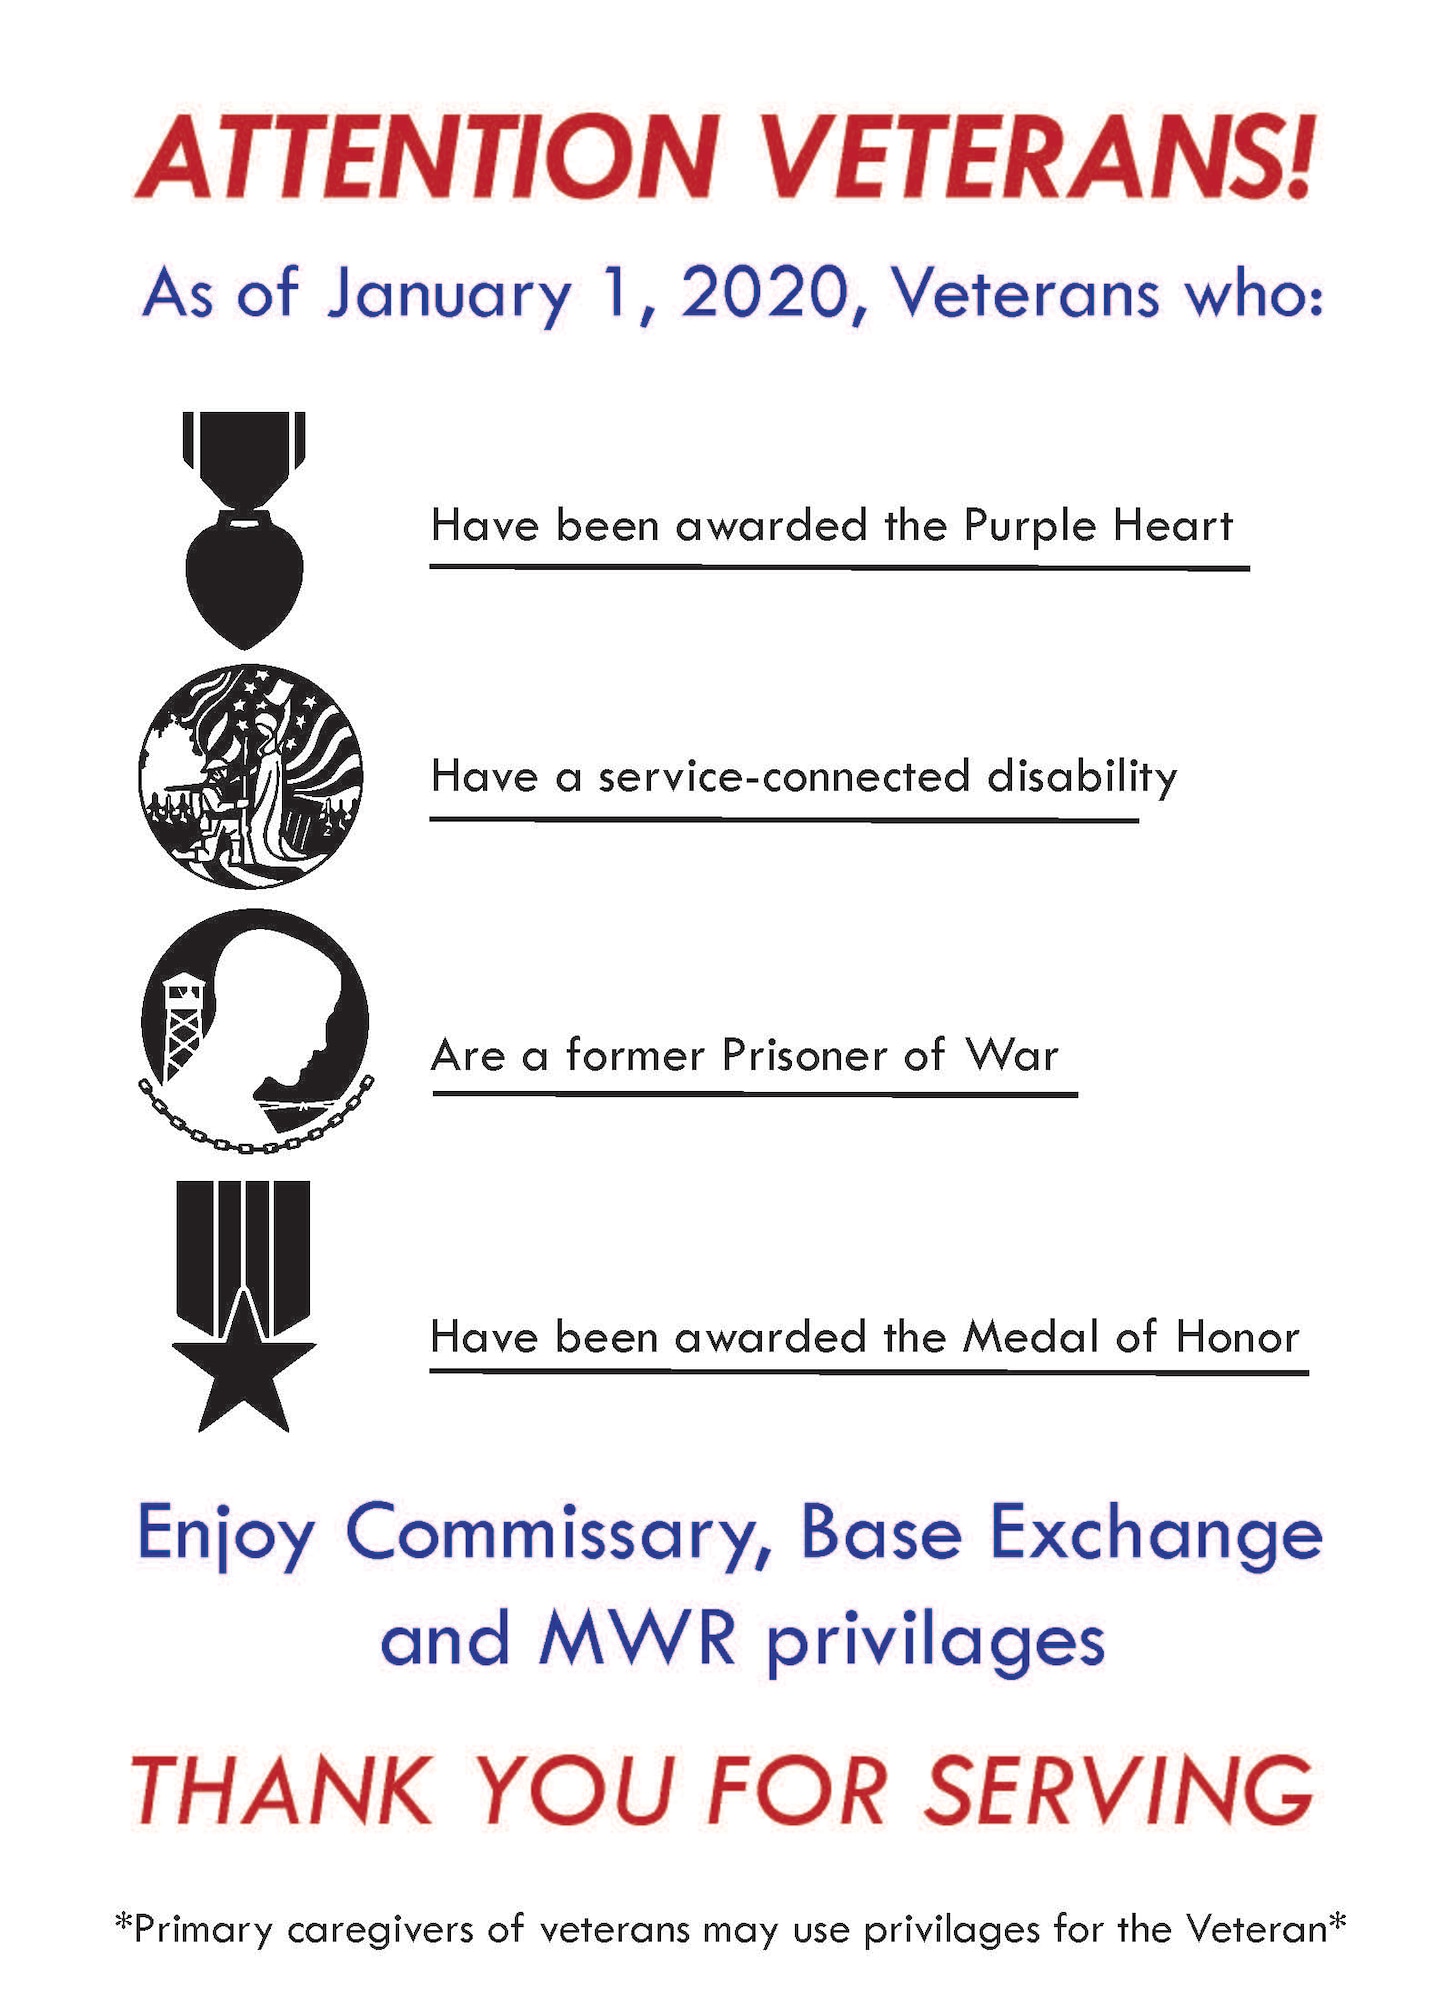 Commissaries, military exchanges and morale, welfare and recreation facilities are ready to welcome veterans with service-related sacrifices, as well as primary caregivers of veterans to enjoy the privileges of the new patronage expansion program.